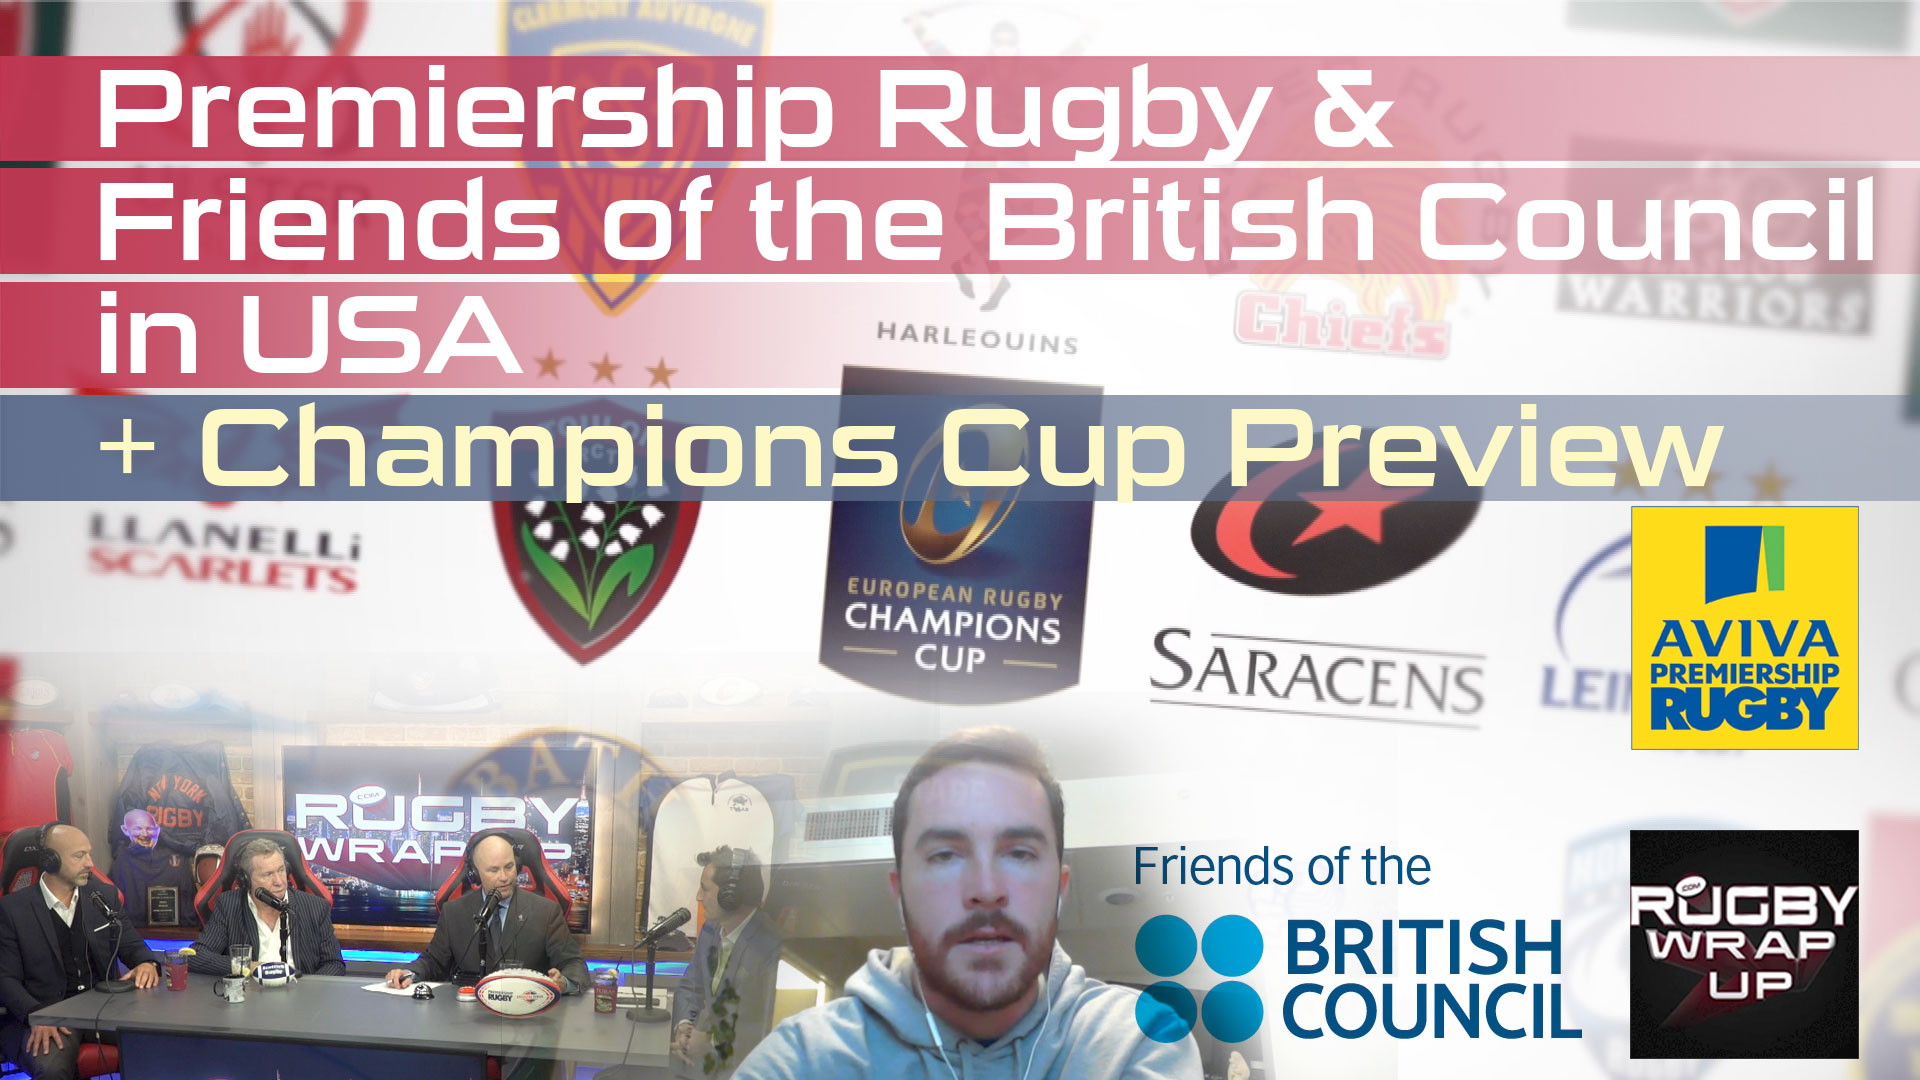 Premiership Rugby in USA & Champions Cup UPDATE